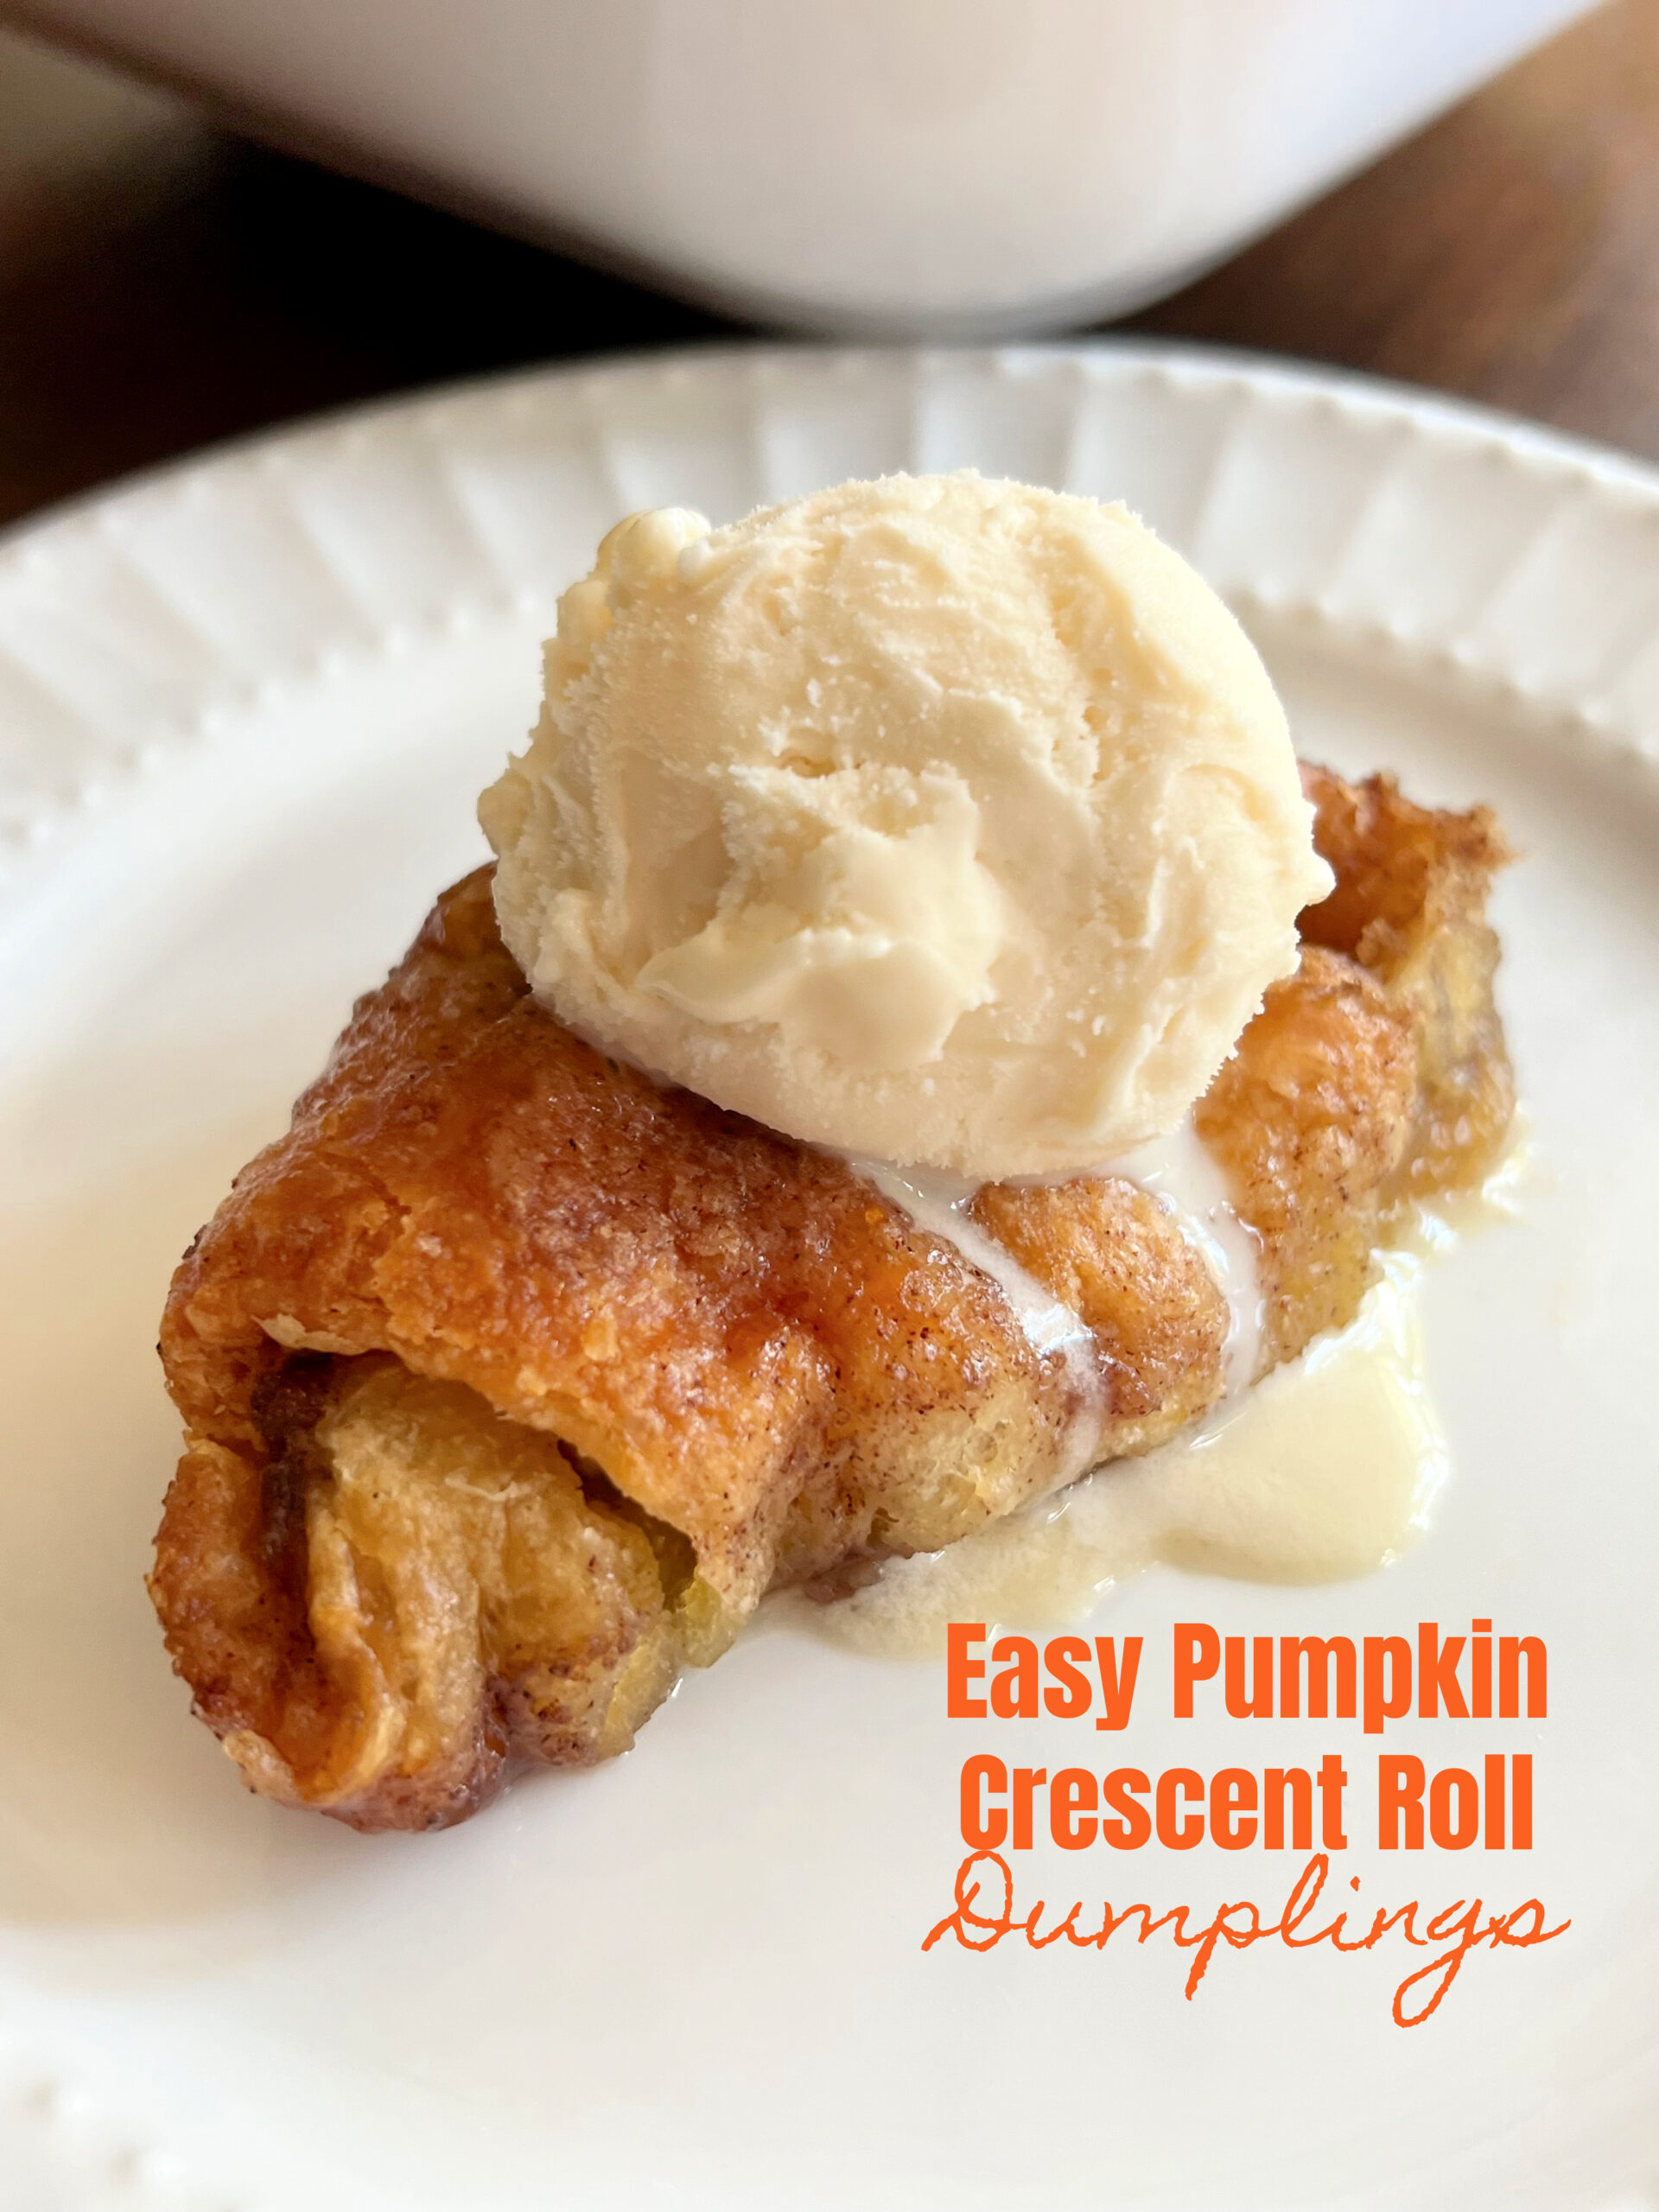 This is a photo of a crescent roll pumpkin dumpling served on a round white plate with a scoop of vanilla cream on top. 